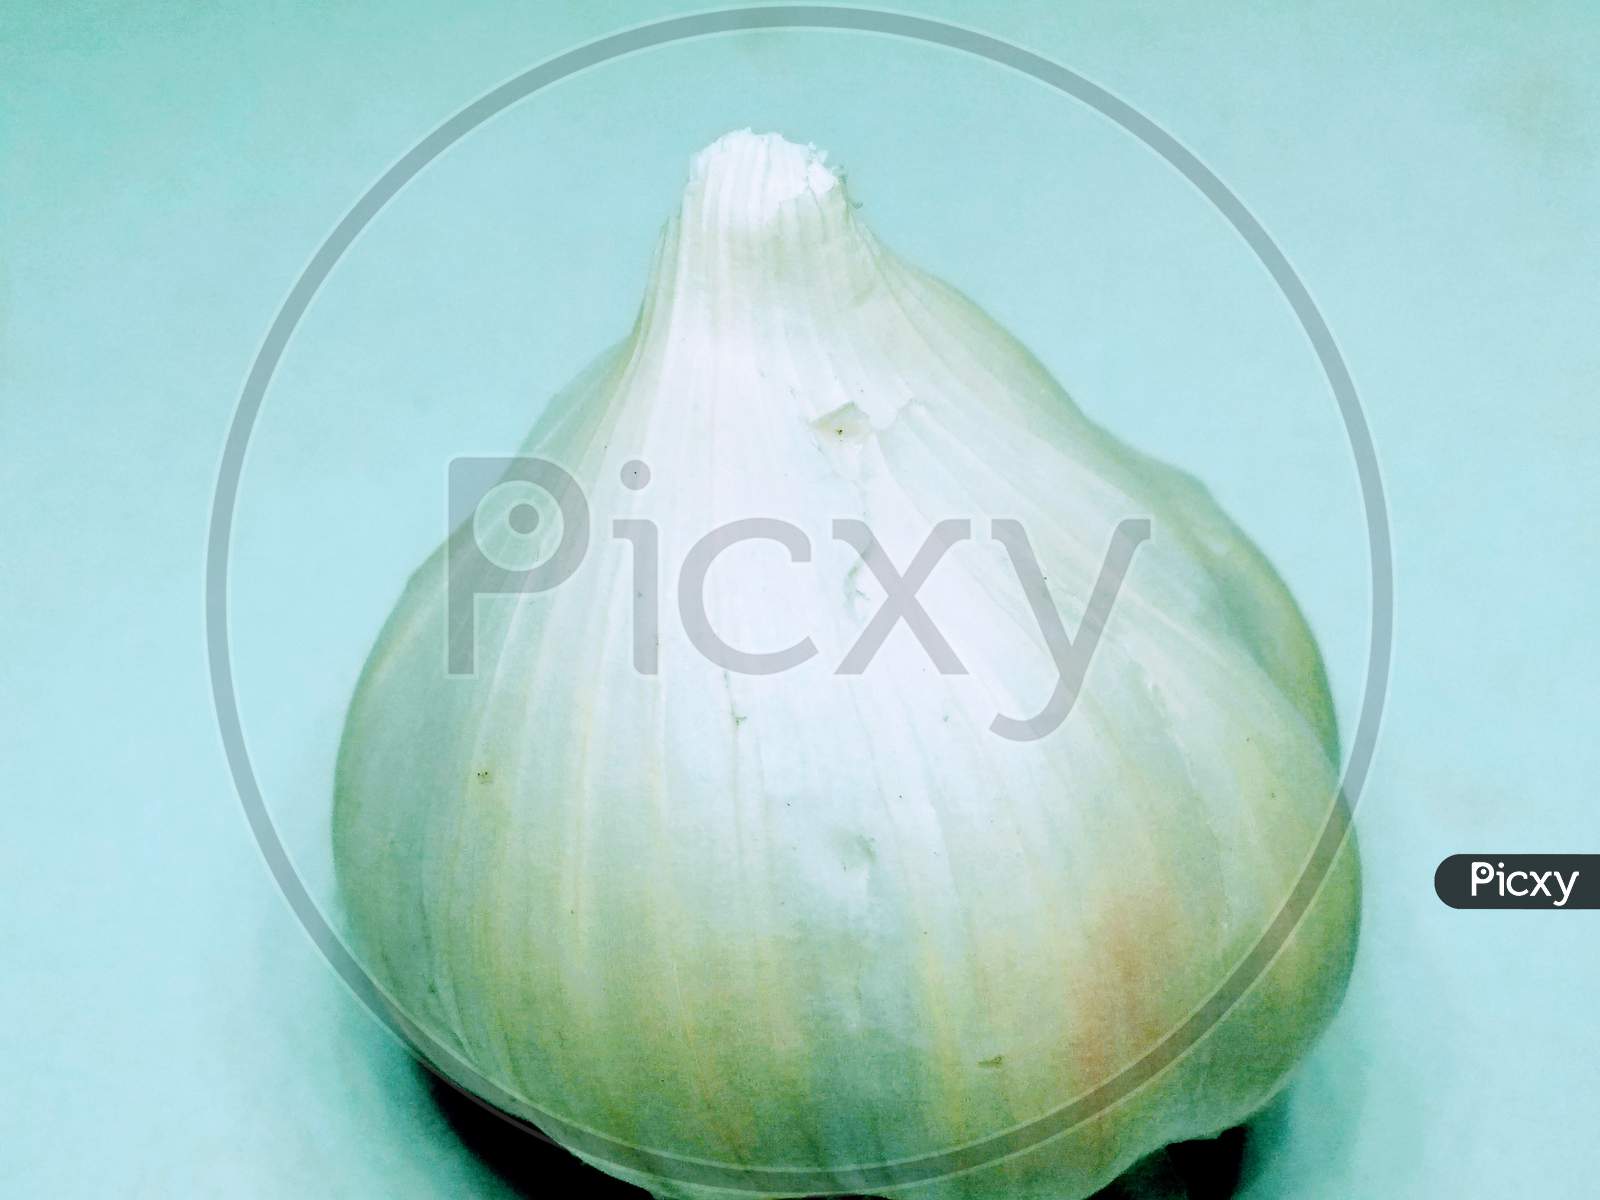 A picture of garlic